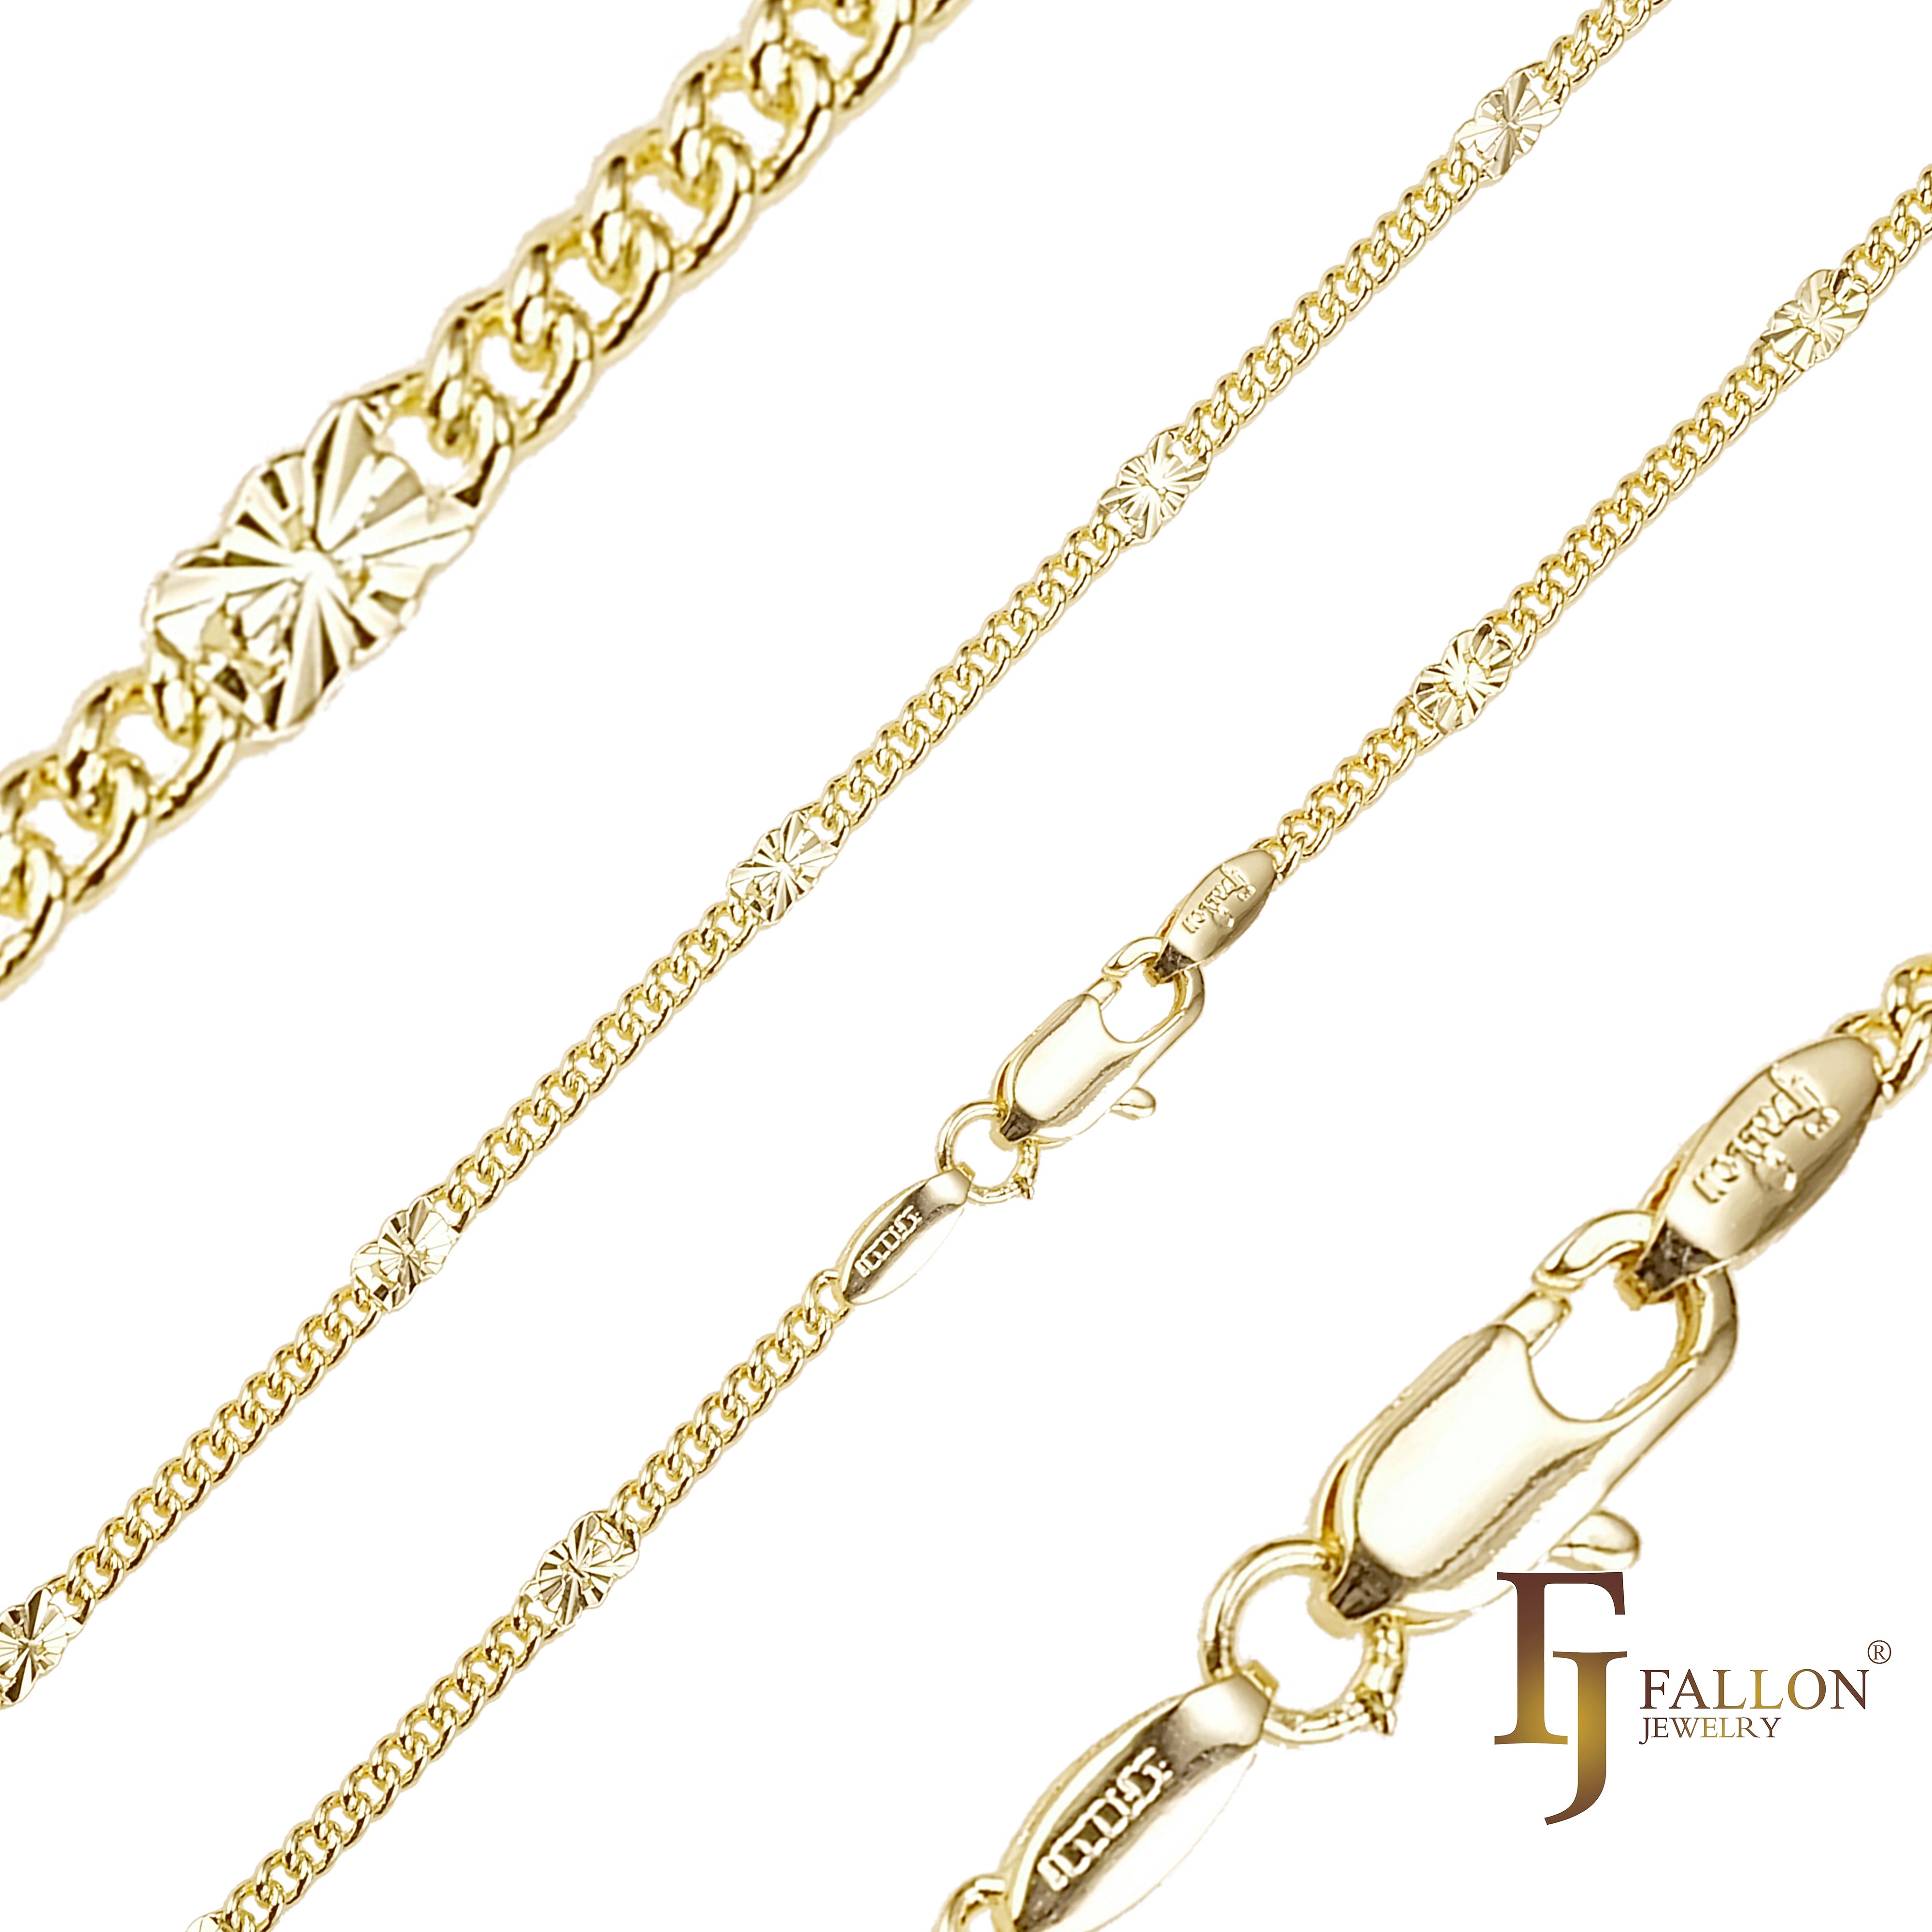 Sunflower fancy link chains plated in 14K Gold, Rose Gold, two tone, White Gold